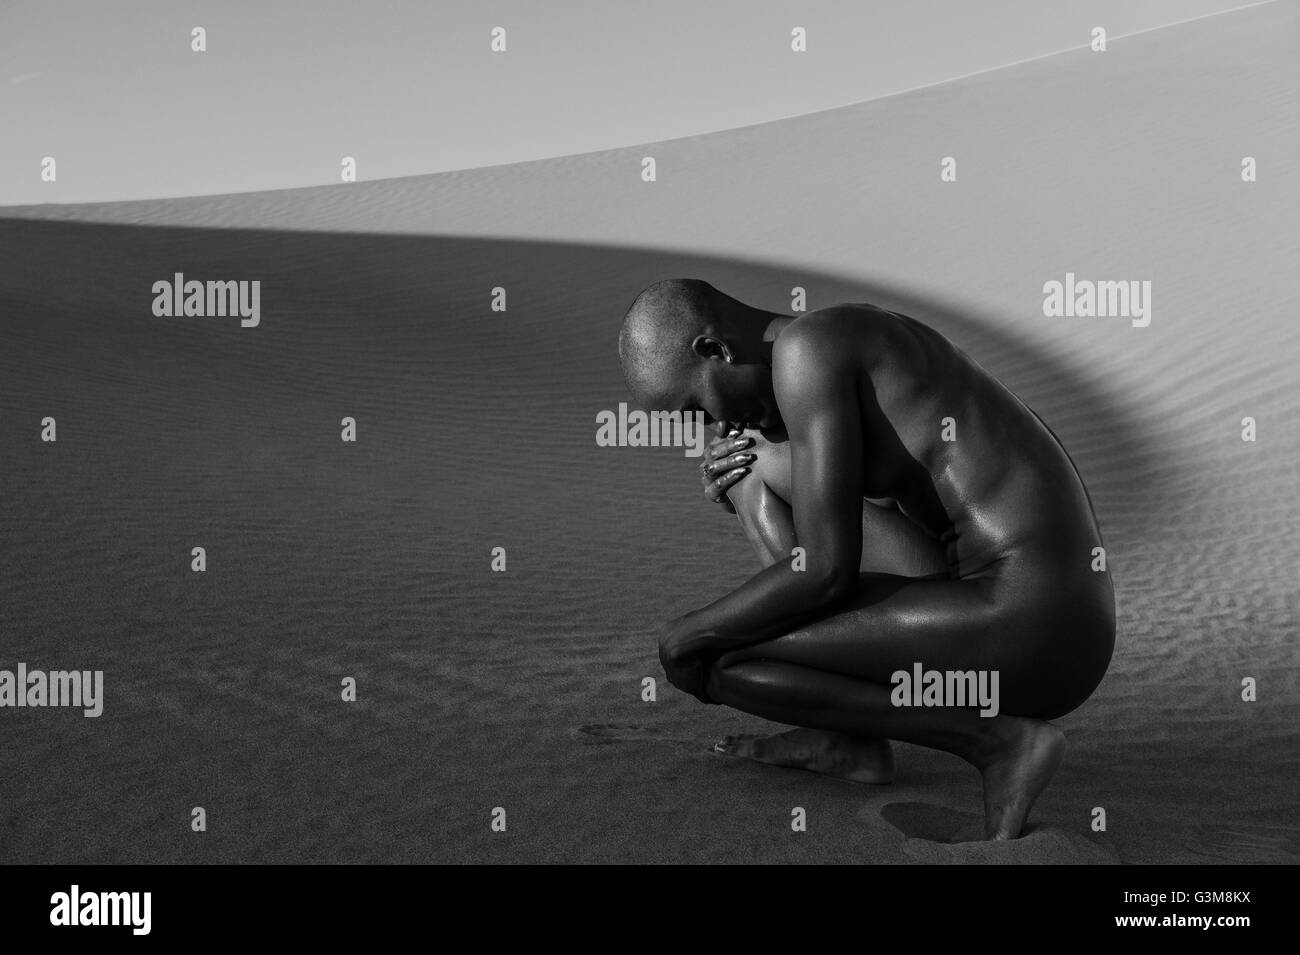 Nude woman crouching in desert Banque D'Images